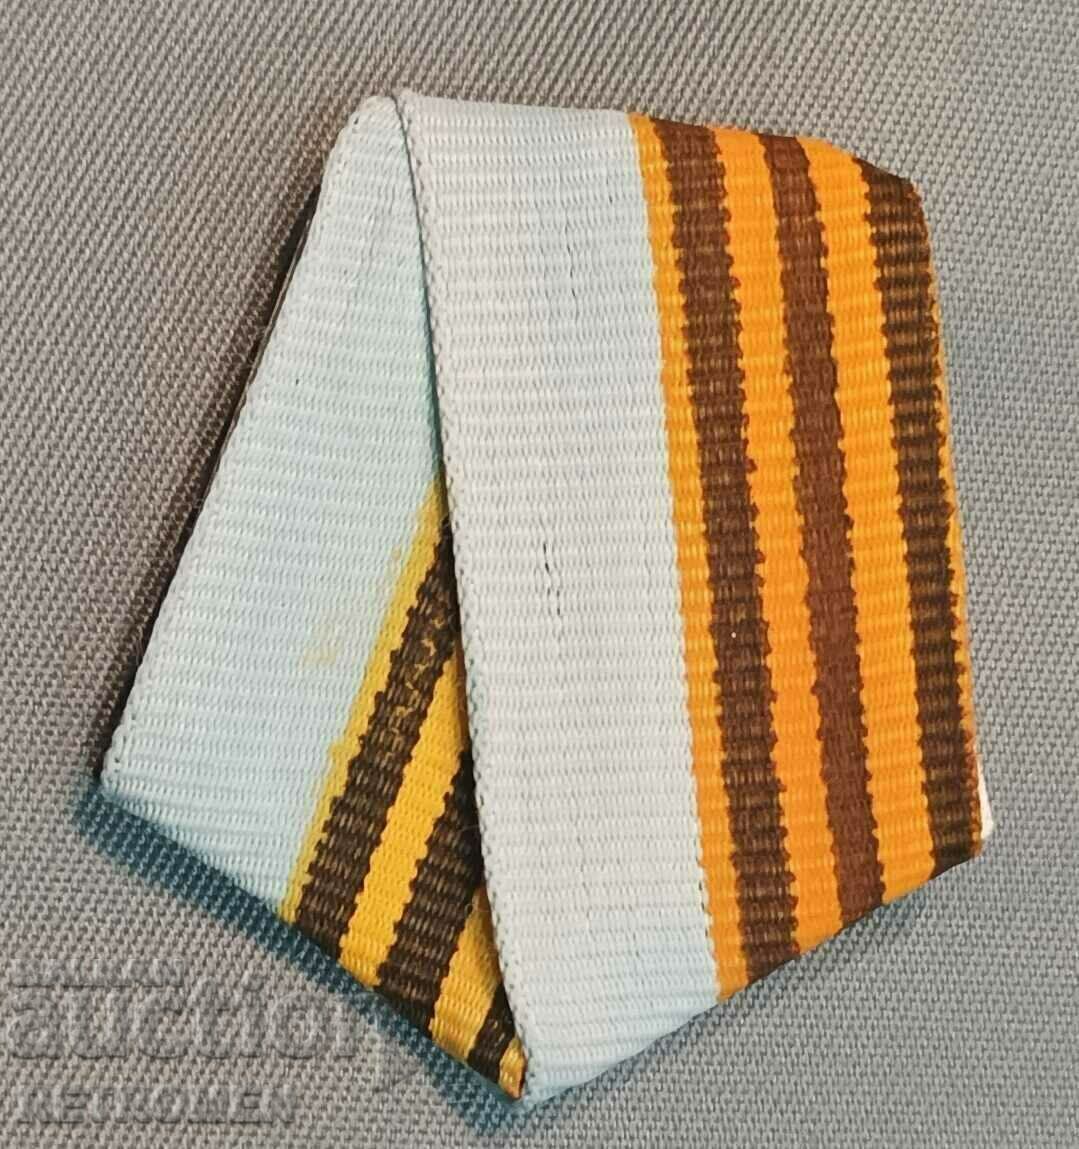 Ribbon for medals from the Russo-Turkish War of Liberation.